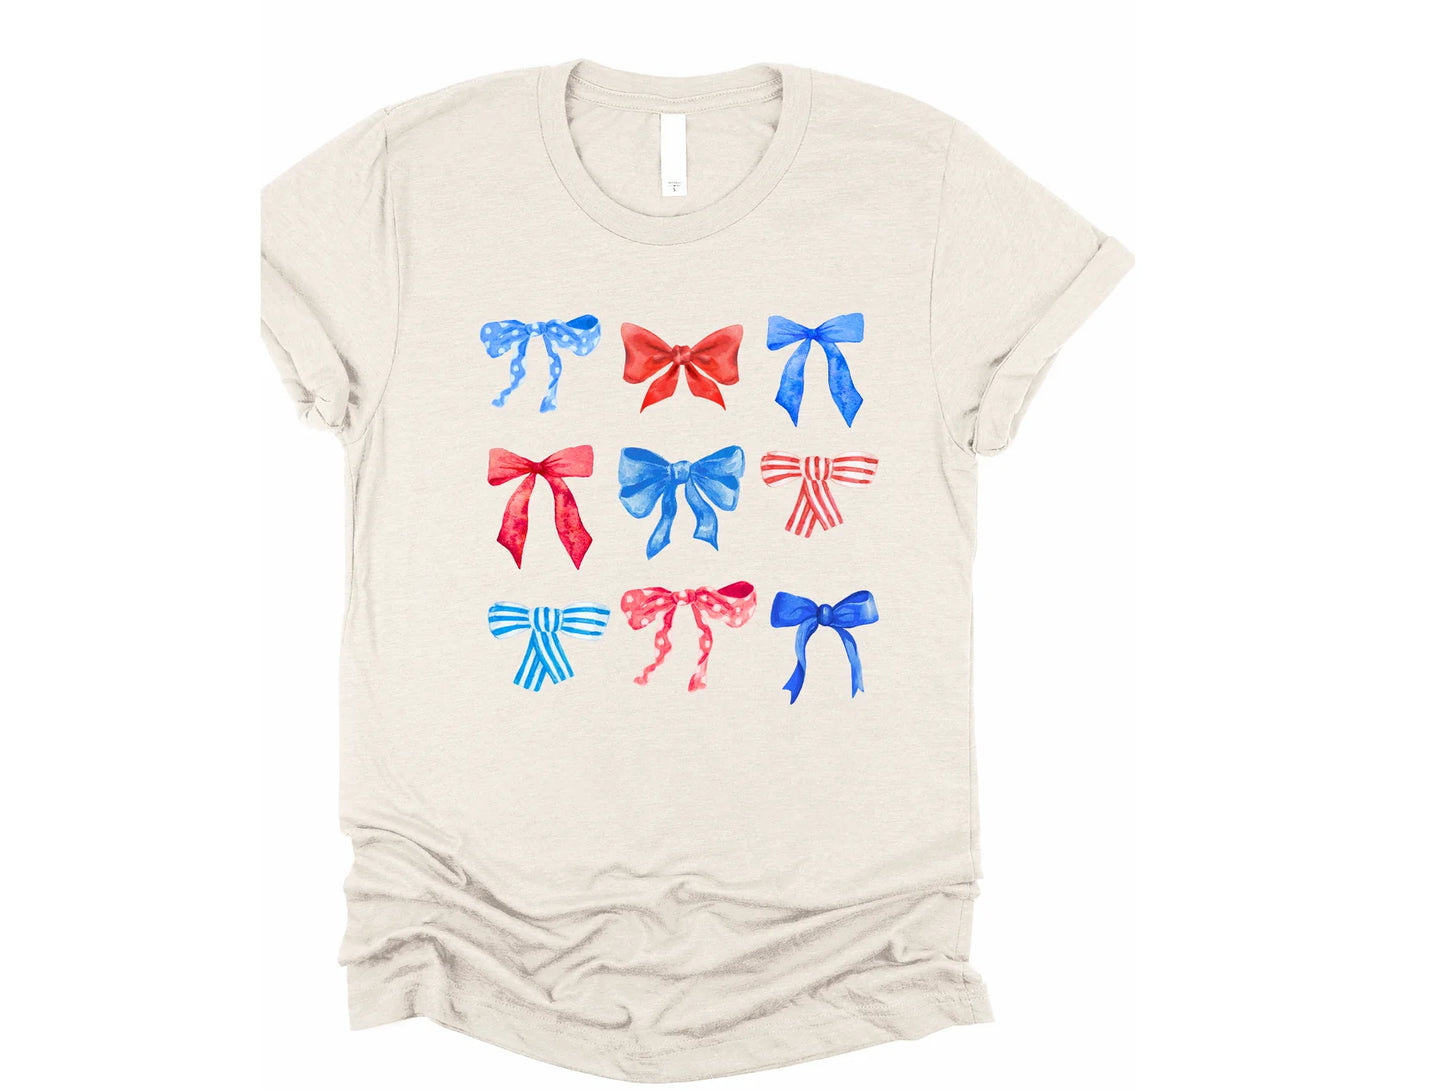 American Bows Graphic Tee - 3 colors